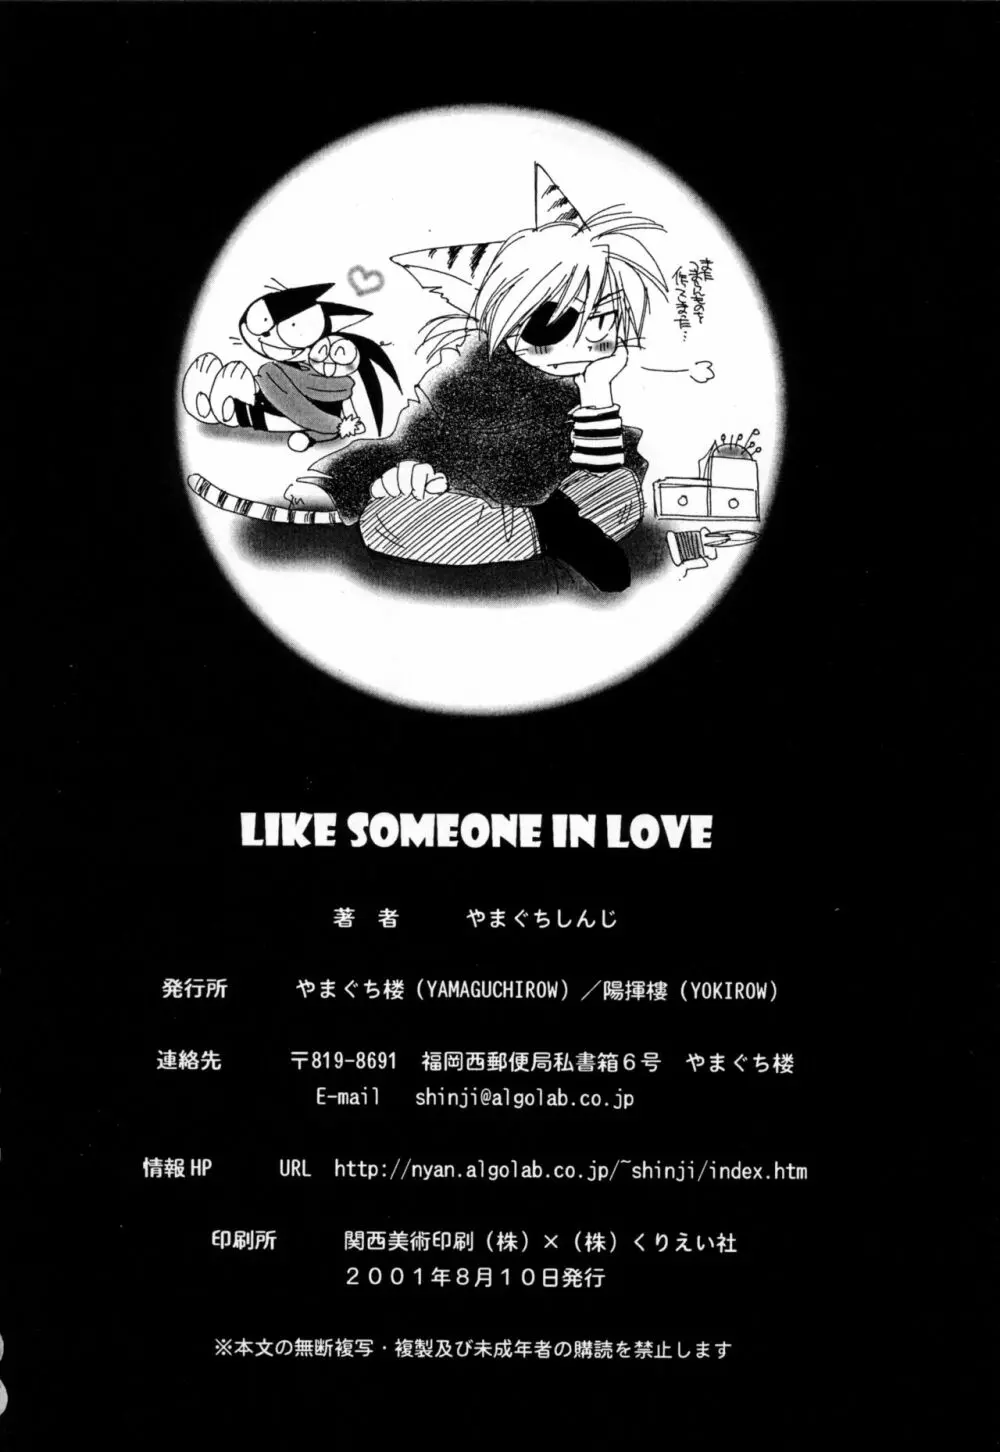 LIKE SOMEONE IN LOVE 21ページ